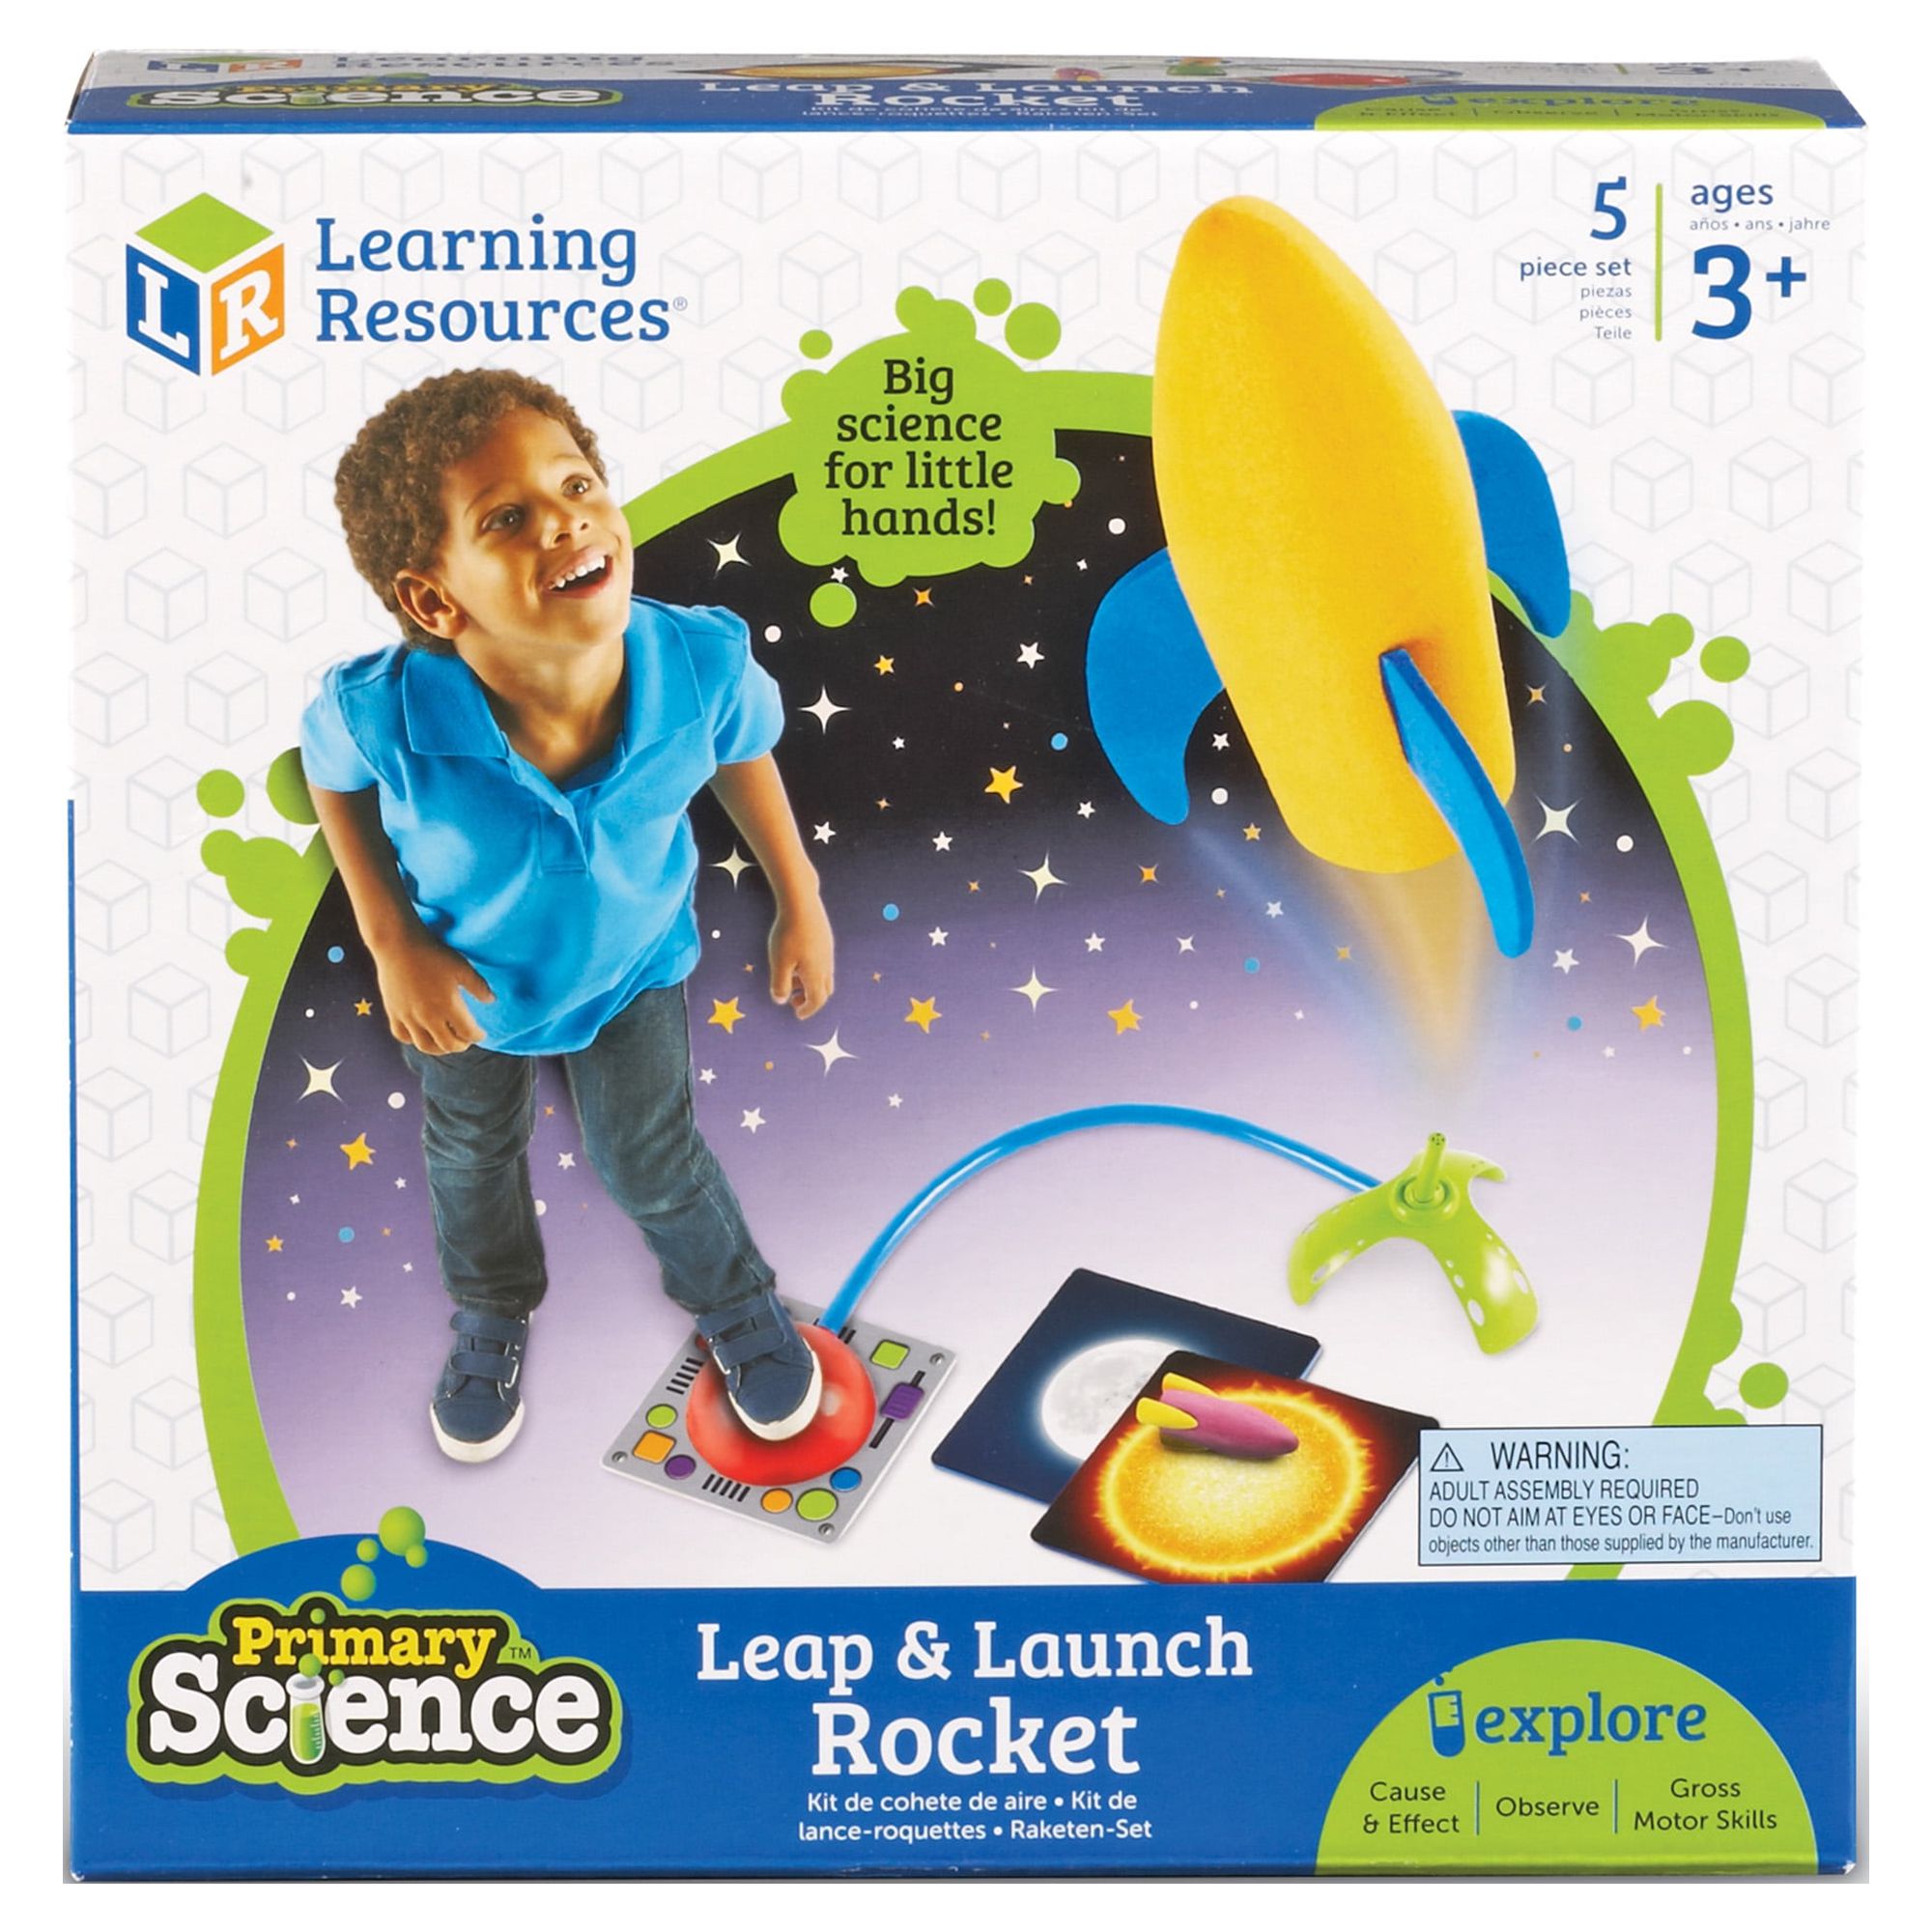 Learning Resources Blast Off Rocket Game, Sustainable Toys - image 3 of 3